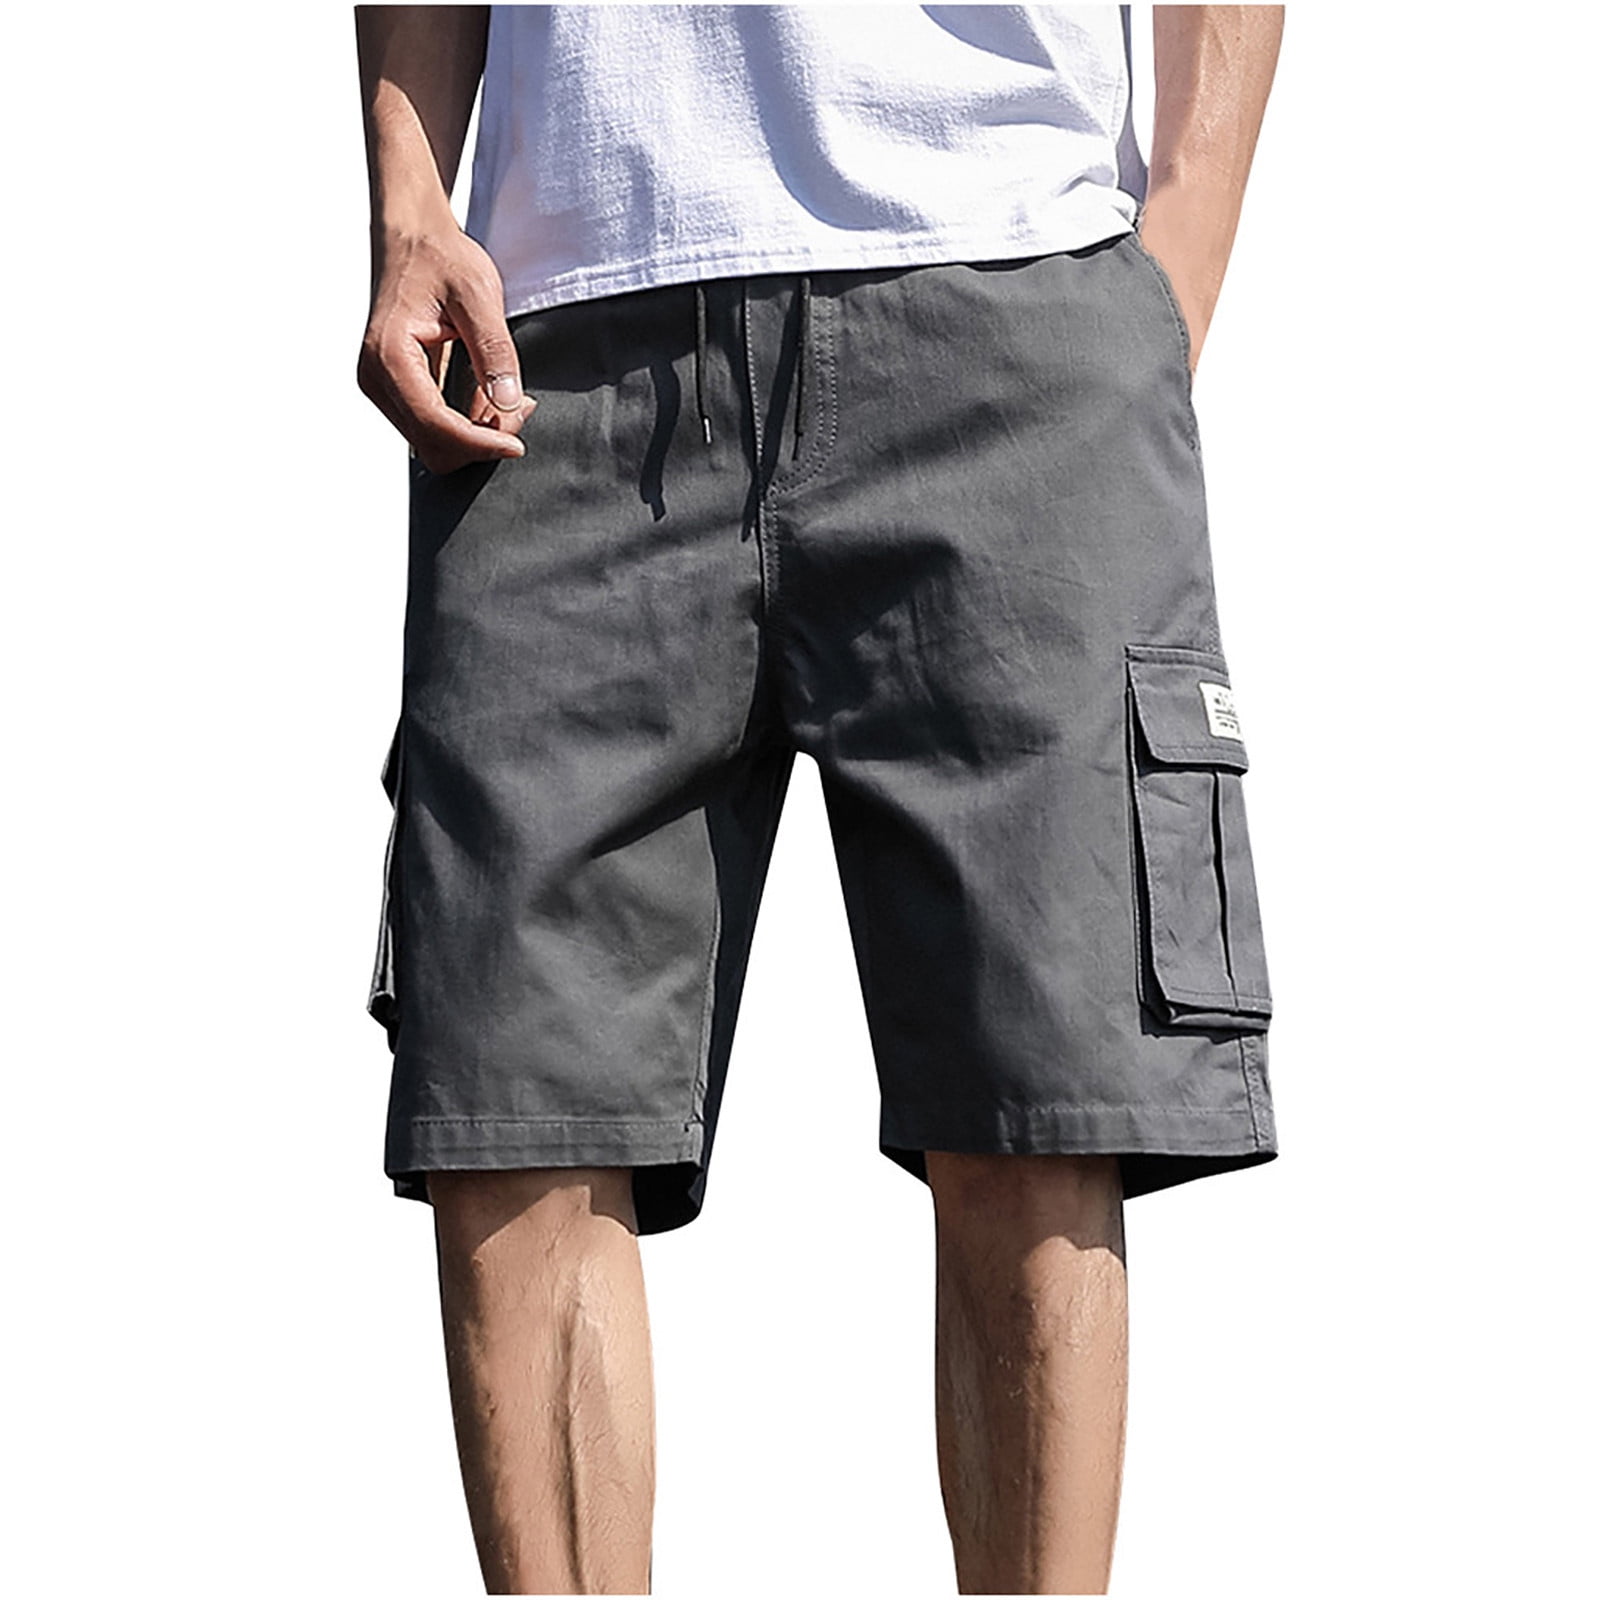  YKJATS Cargo Shorts for Men Mens Shorts Elastic Waist Relaxed  Fit Cotton Lightweight Hiking Fishing Summer Work Pants Work Shorts for Men  Flexible Drawstring Joggers (Small, Black) : Sports & Outdoors